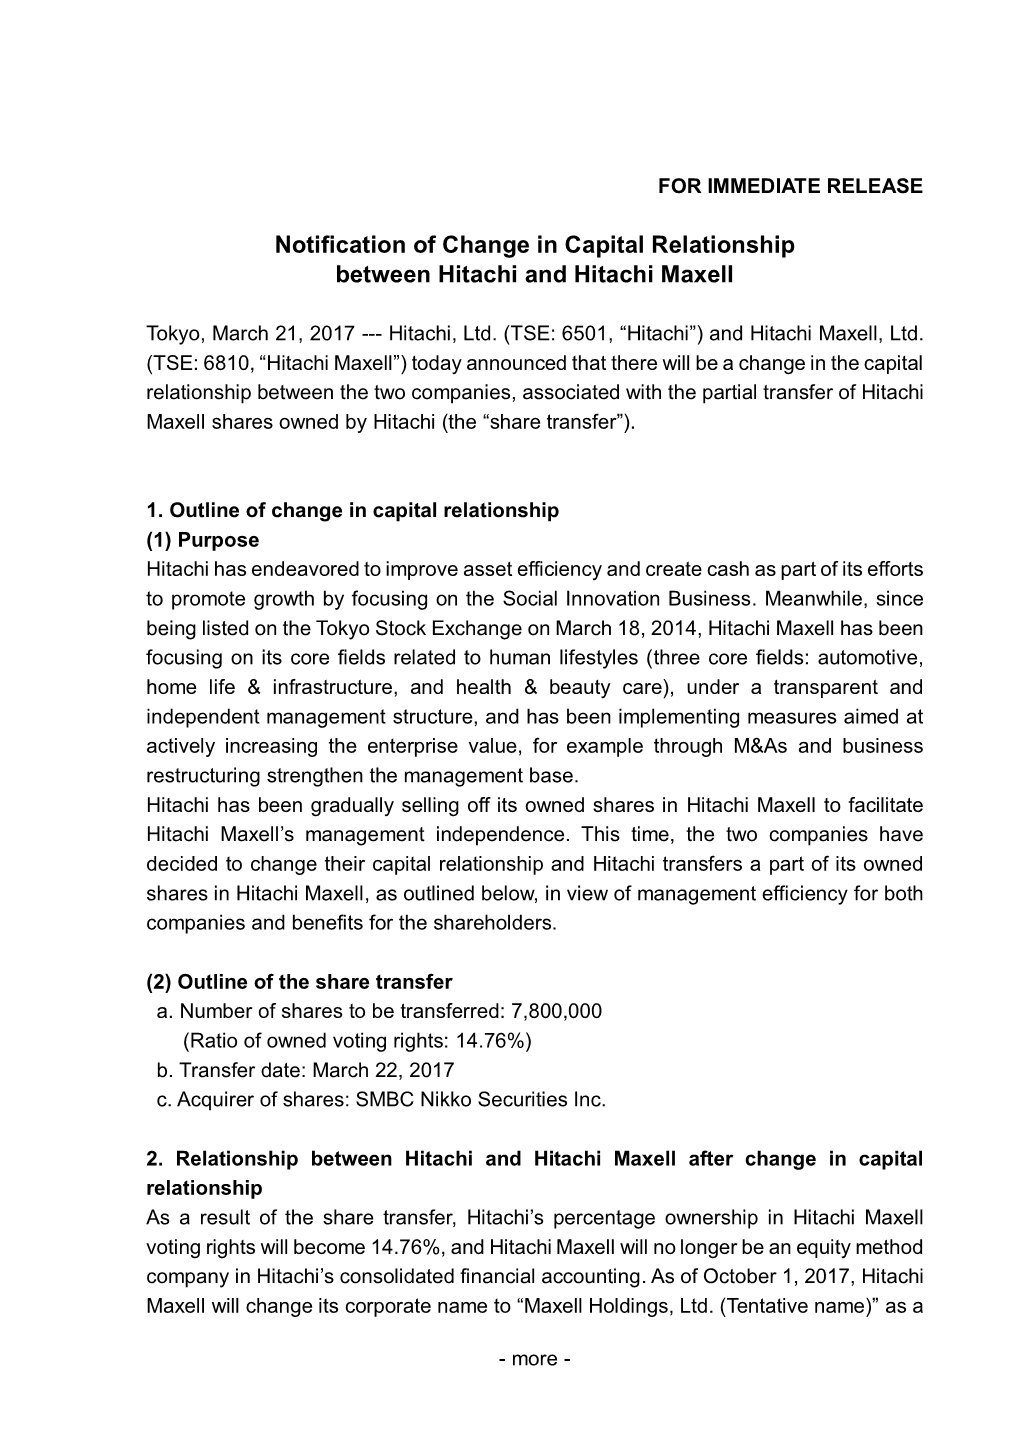 Notification of Change in Capital Relationship Between Hitachi and Hitachi Maxell